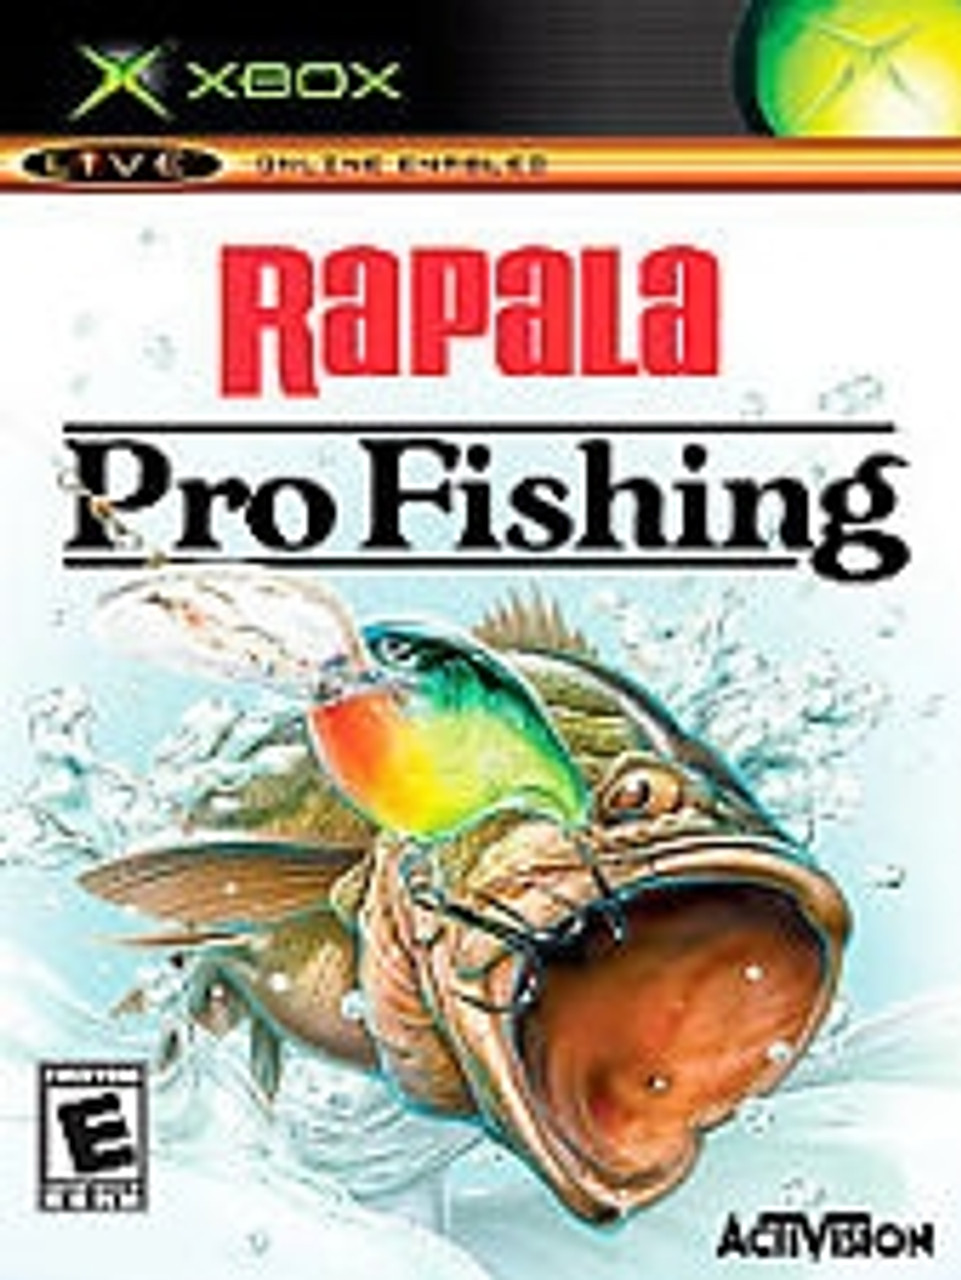 https://cdn11.bigcommerce.com/s-ymgqt/images/stencil/1280x1280/products/28623/19782/Game-Xbox-RapalaProFishing-2__74562.1681244980.jpg?c=2